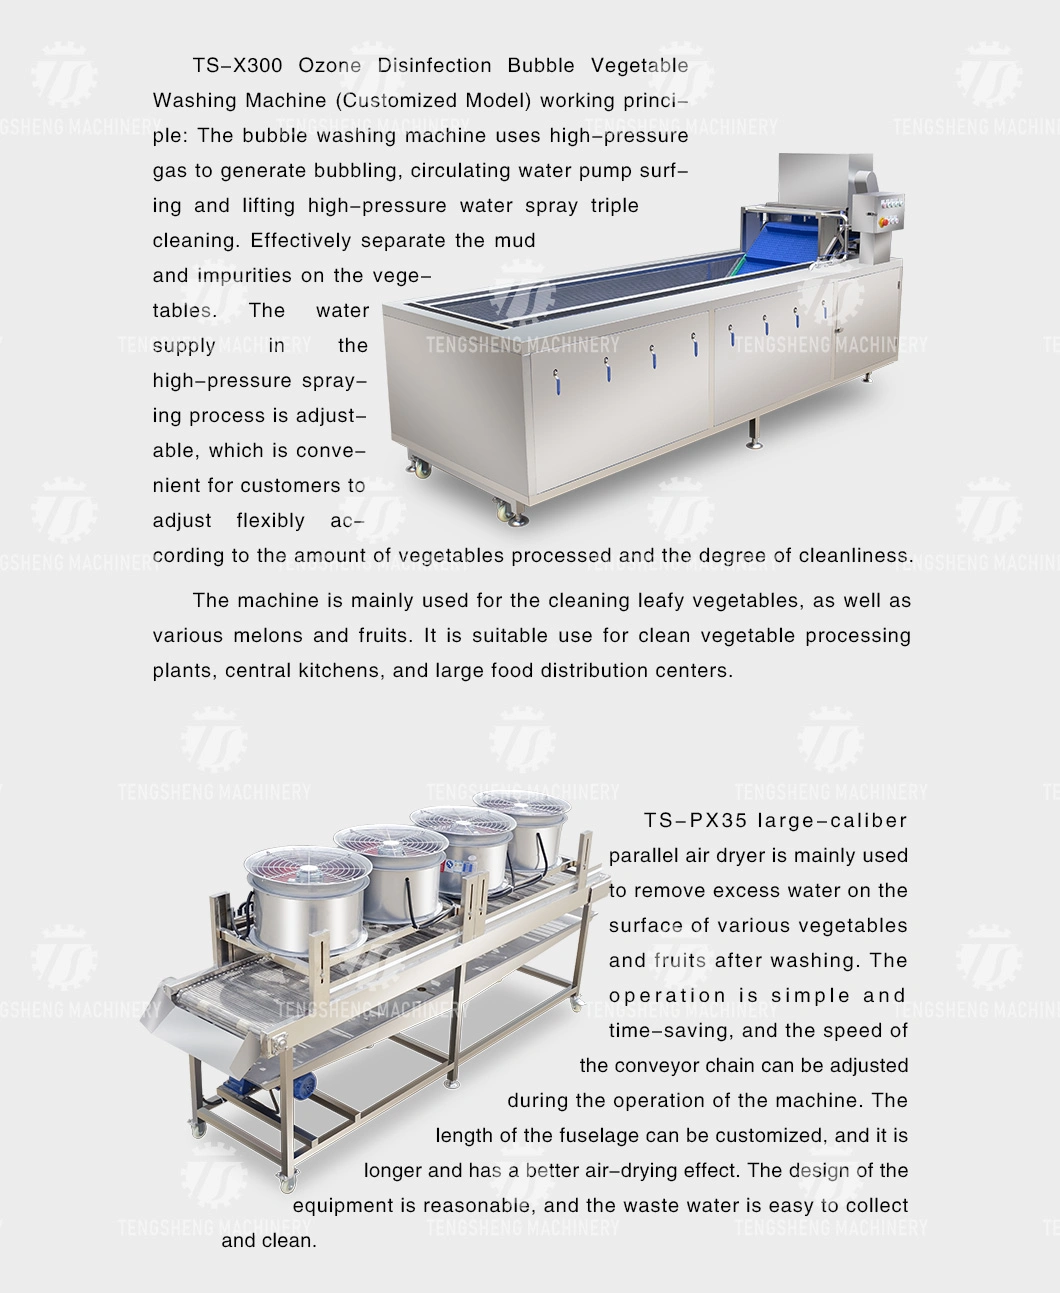 Industrial Vegetable and Fruit Potato Selection of Hair Roller Bubble Cleaning Drying Cutting Machine Production Line